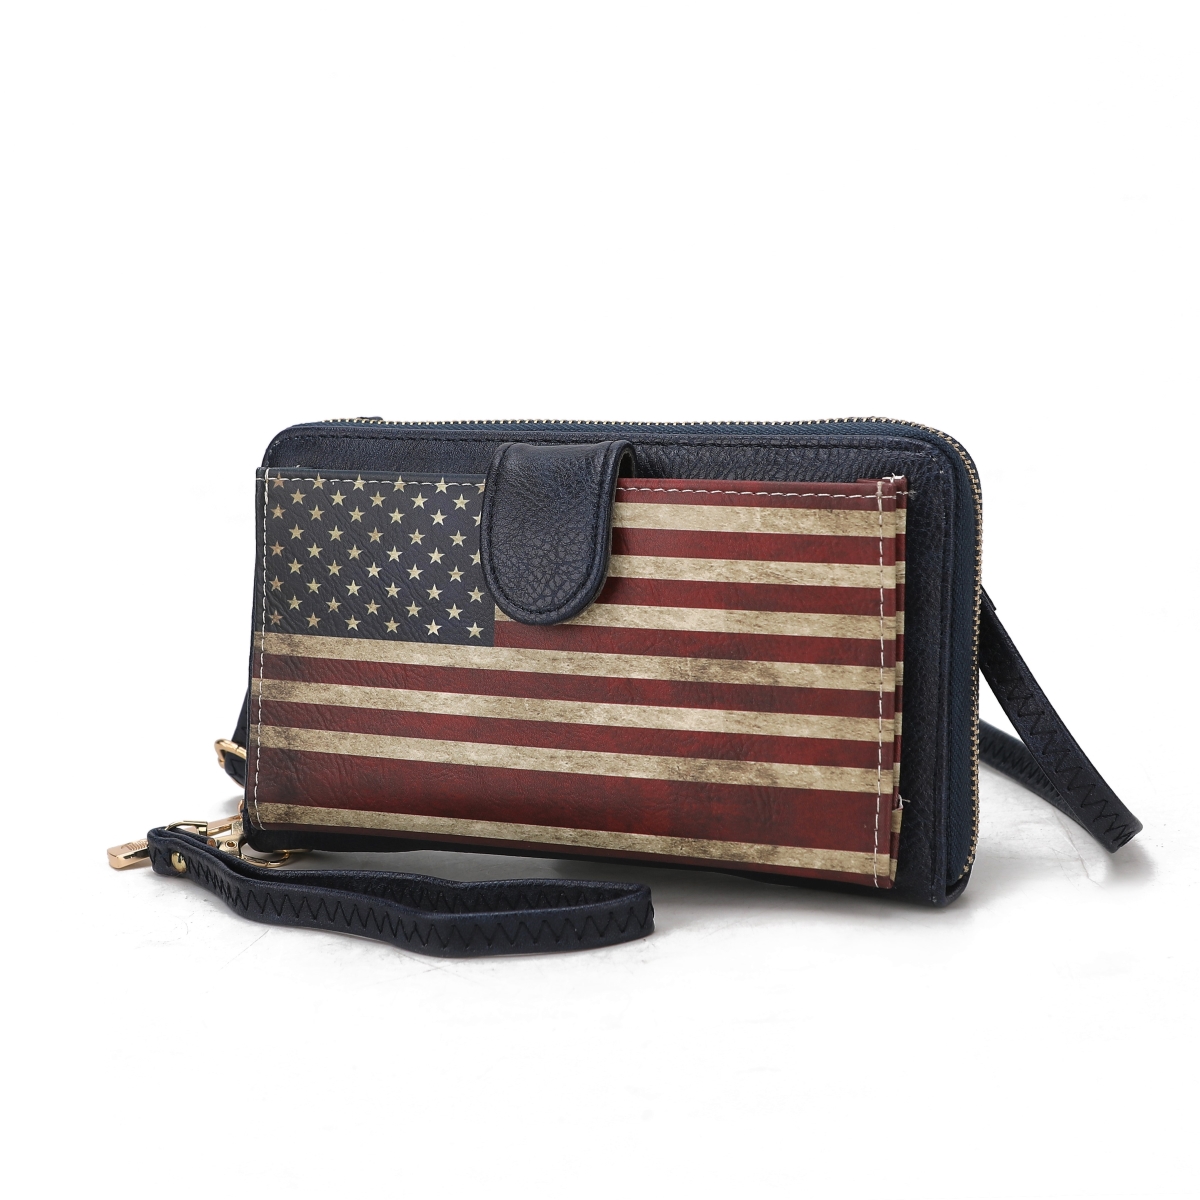 Picture of MKF Collection by Mia K. MKF-FG7406NV Kiara Smartphone and Wallet Convertible FLAG Crossbody Bag